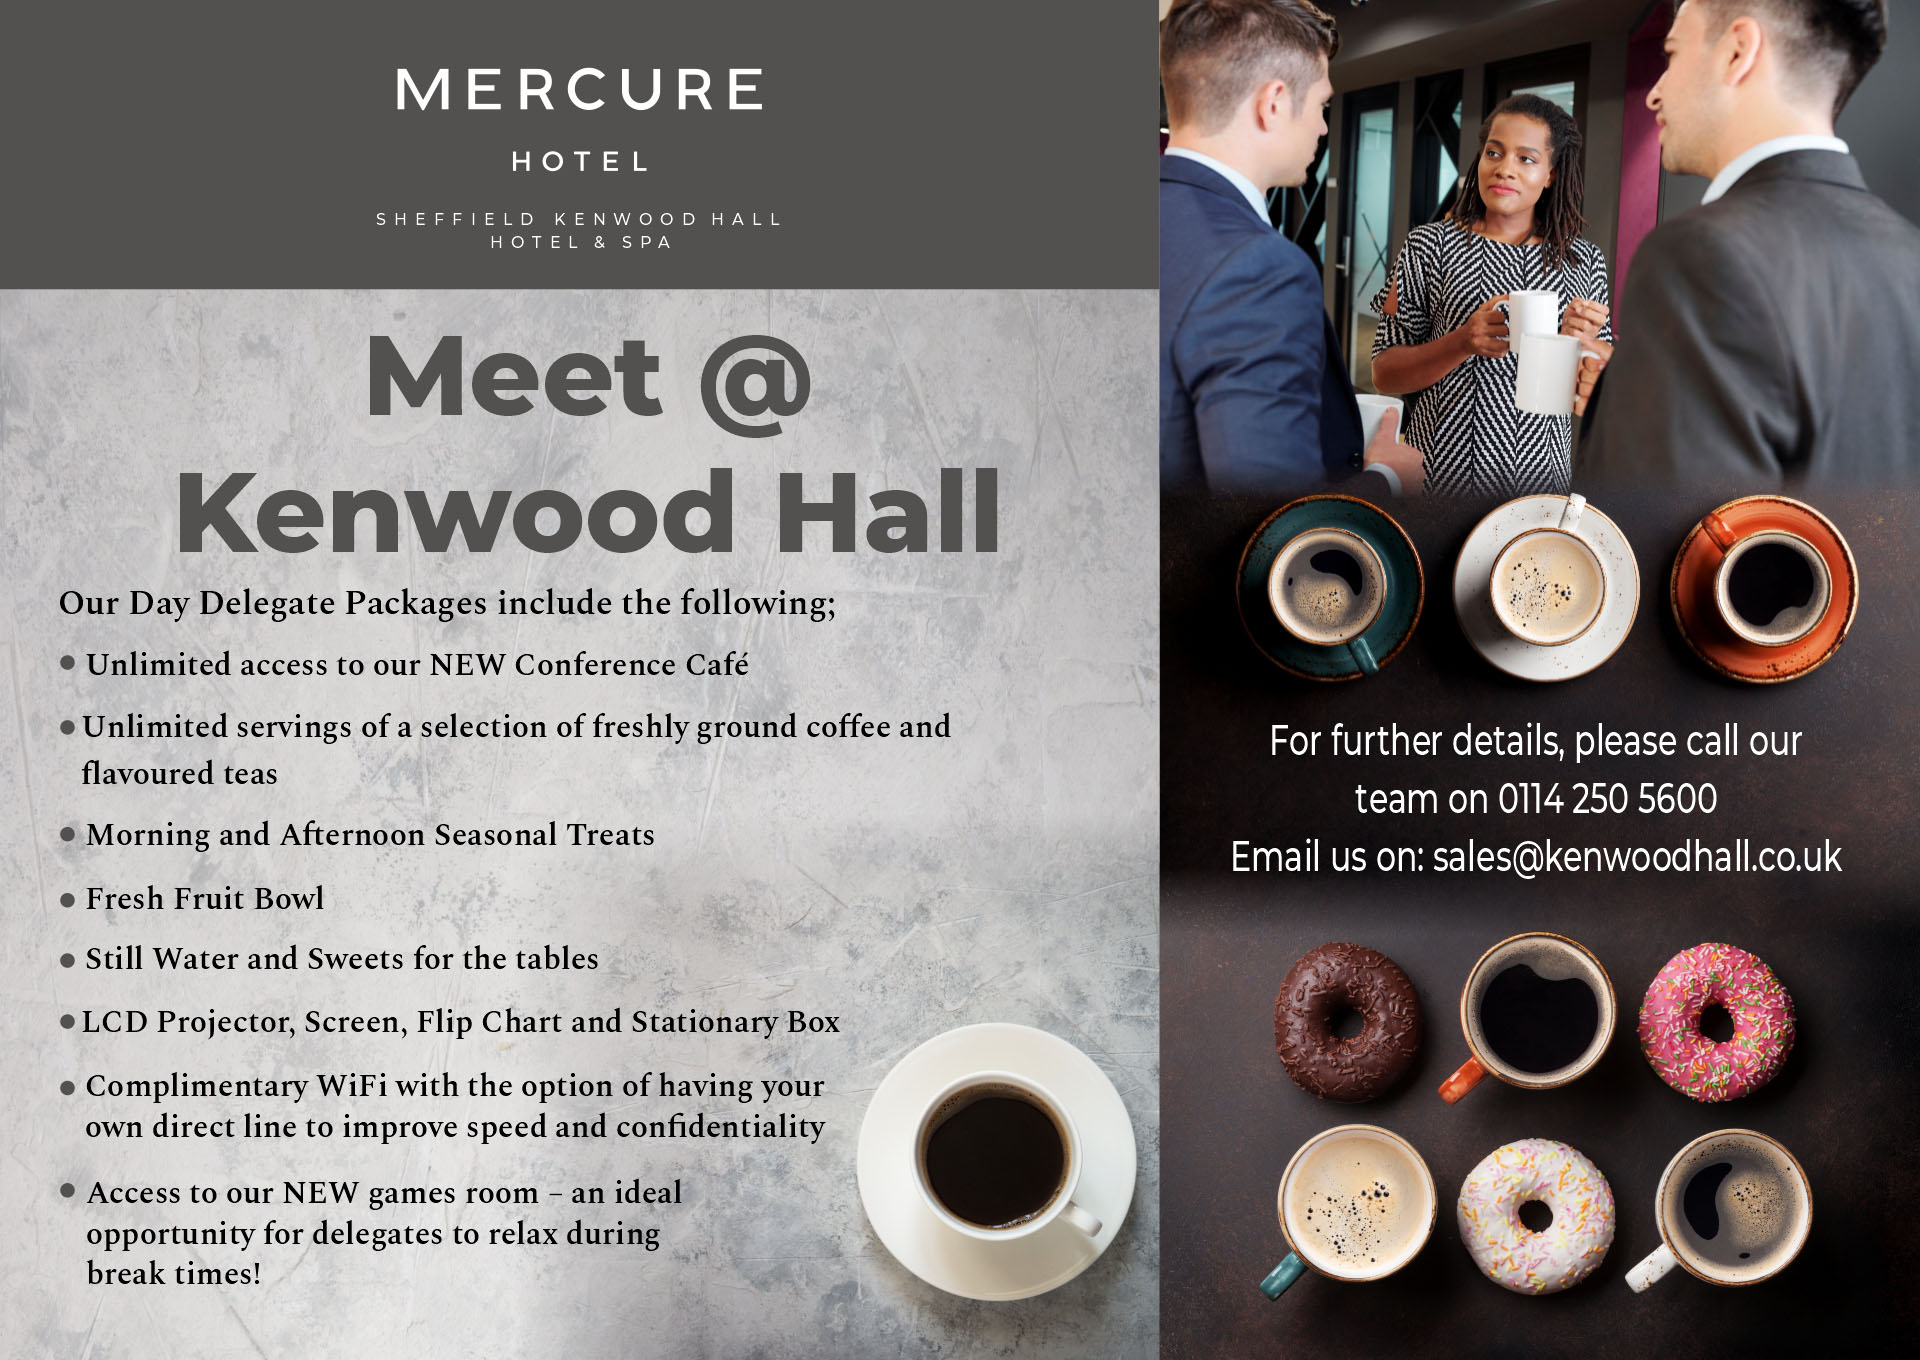 Meetings and Conferences fact sheet for Mercure Kenwood Hall Hotel & Spa Sheffield